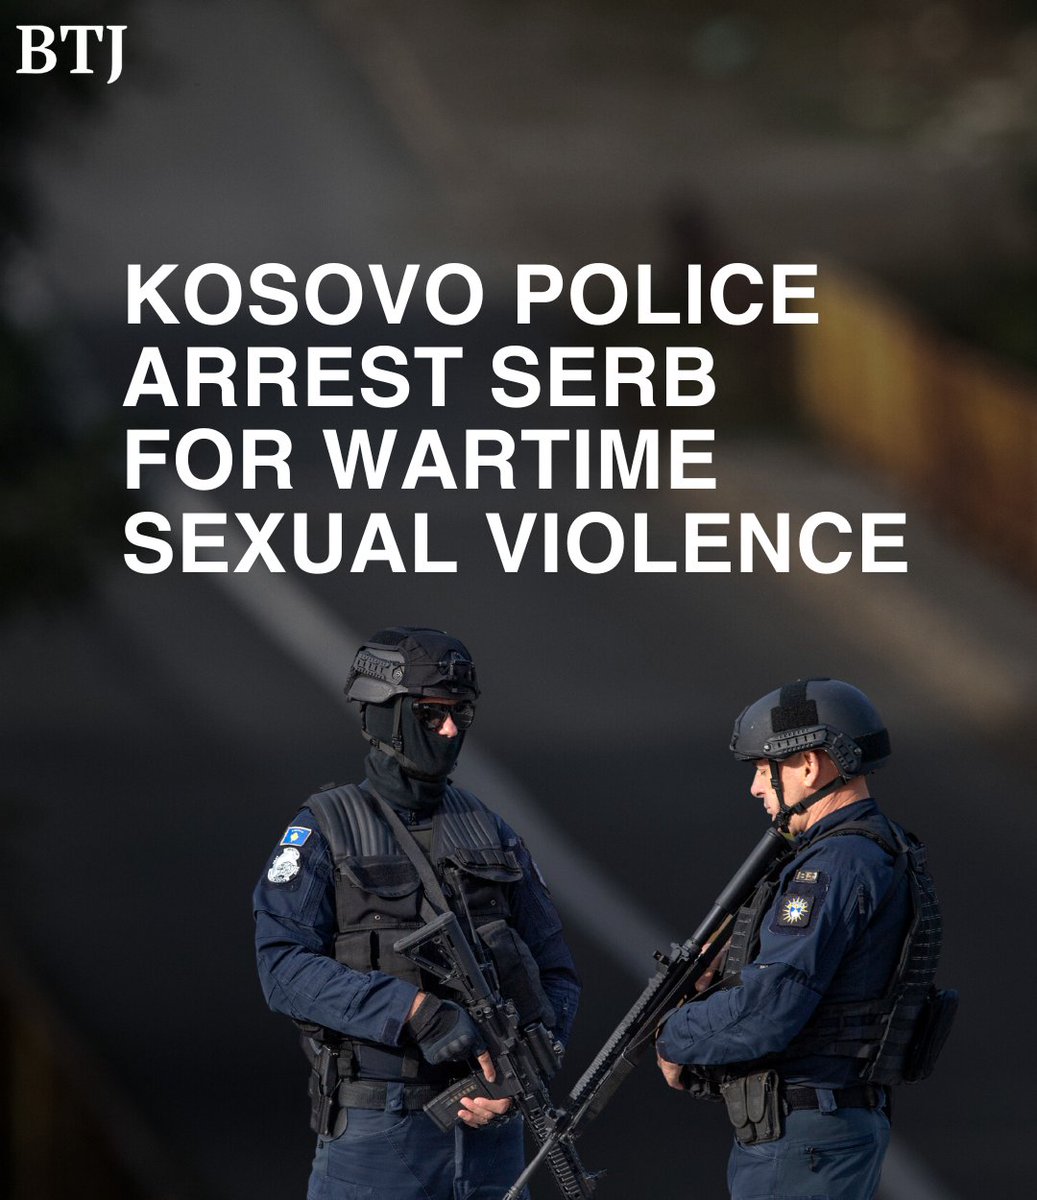 Kosovo police arrested a Serb in North Mitrovica who is accused of sexual violence during the 1998-99 war, sparking an angry reaction from Serbian officials